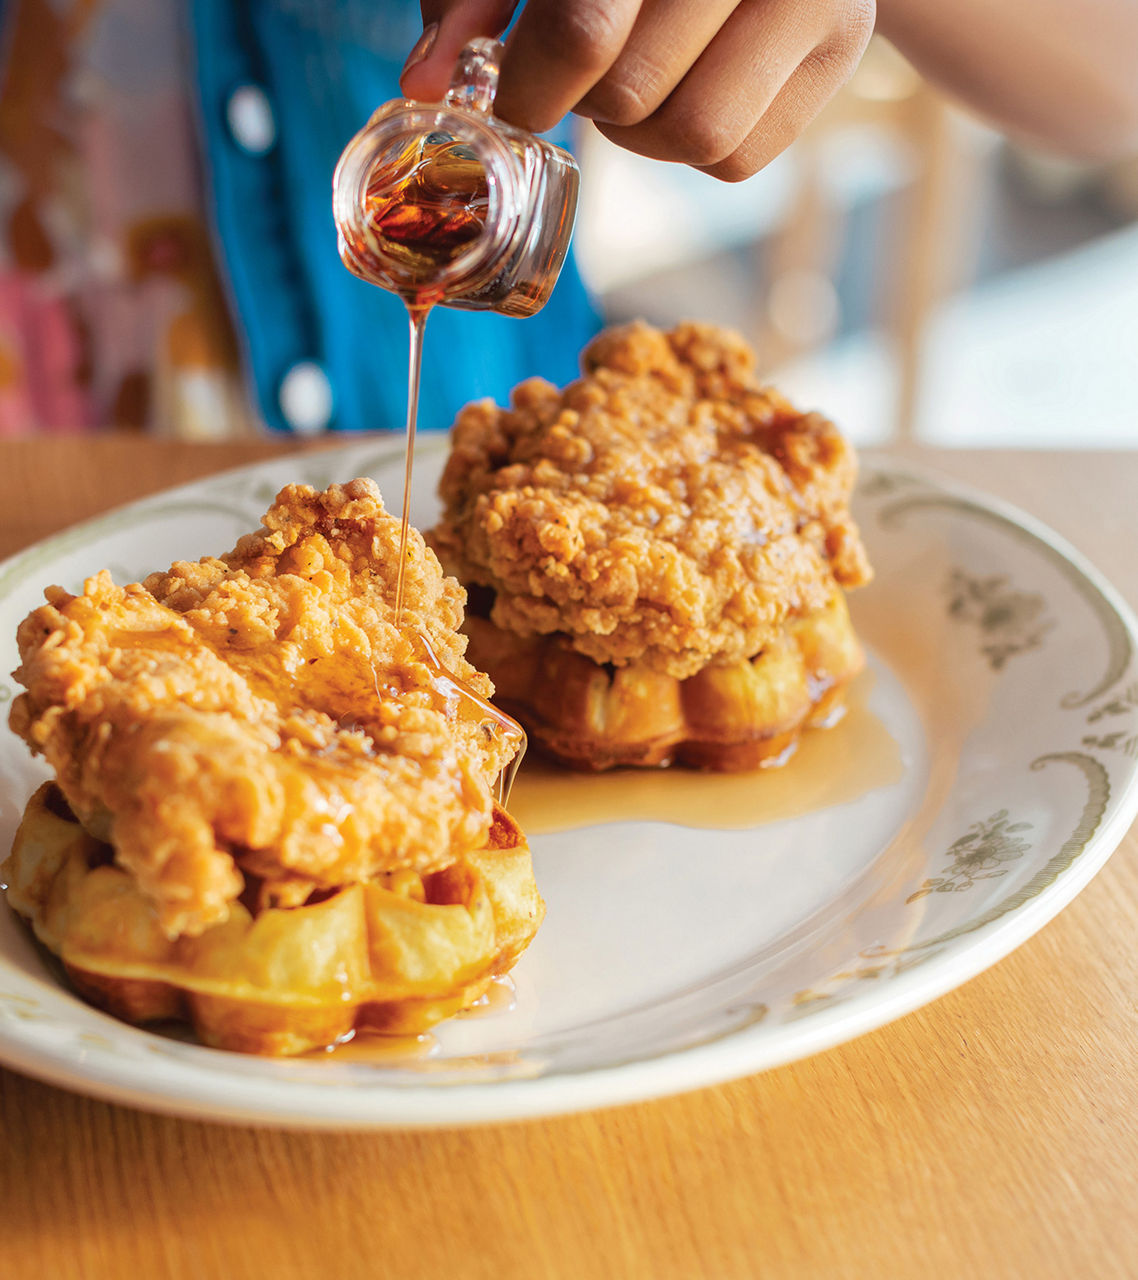 The Mason Jar Chicken and Waffles with Honey Syrup